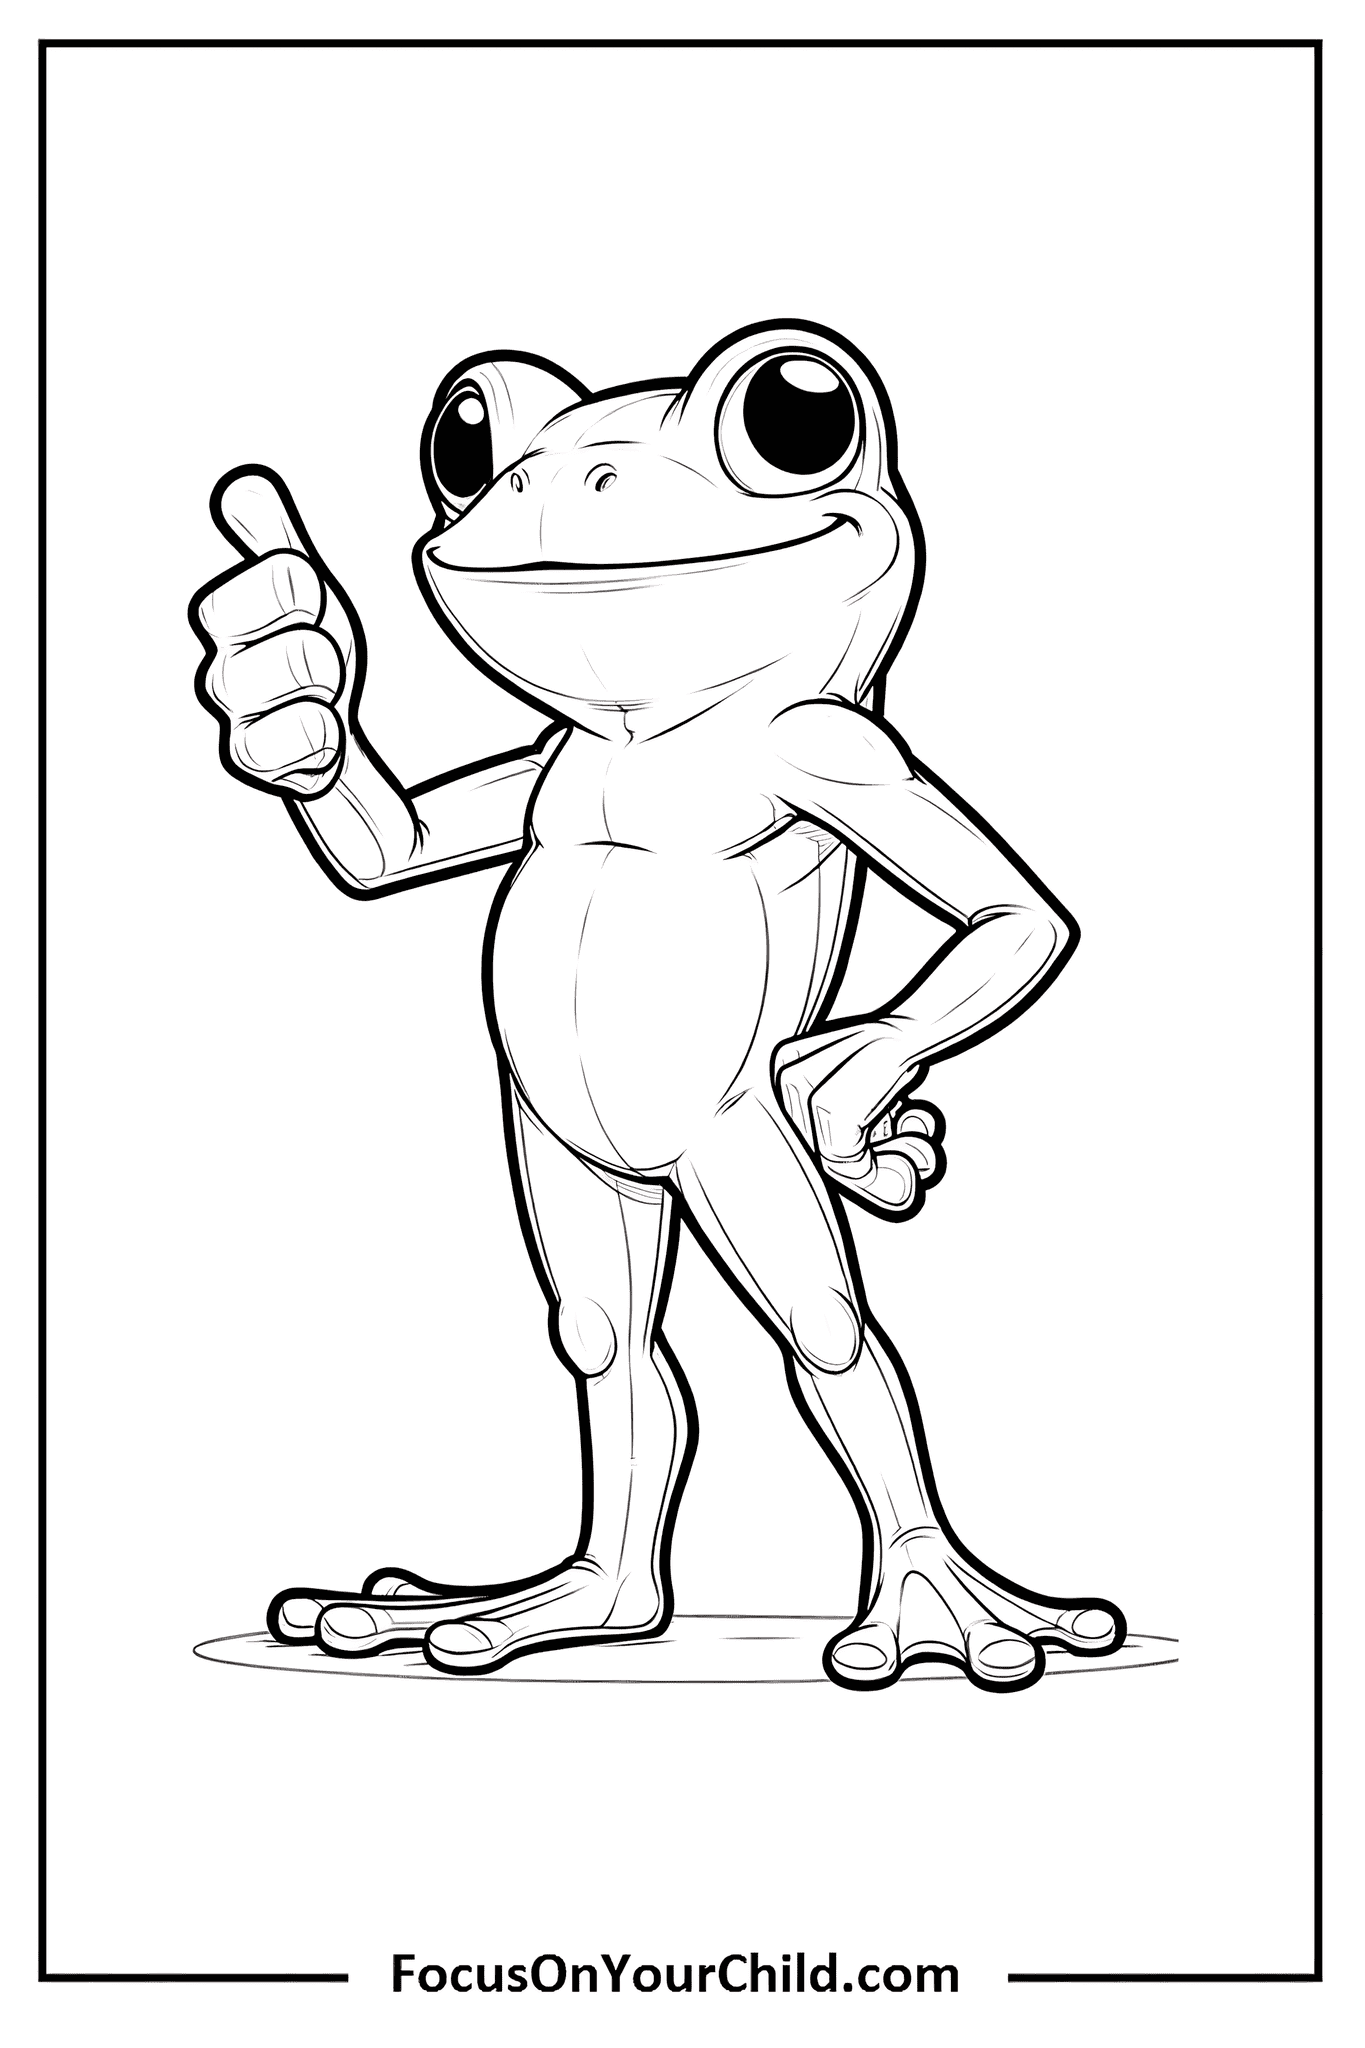 Friendly cartoon frog with thumbs up gesture, promoting positivity and confidence for children.